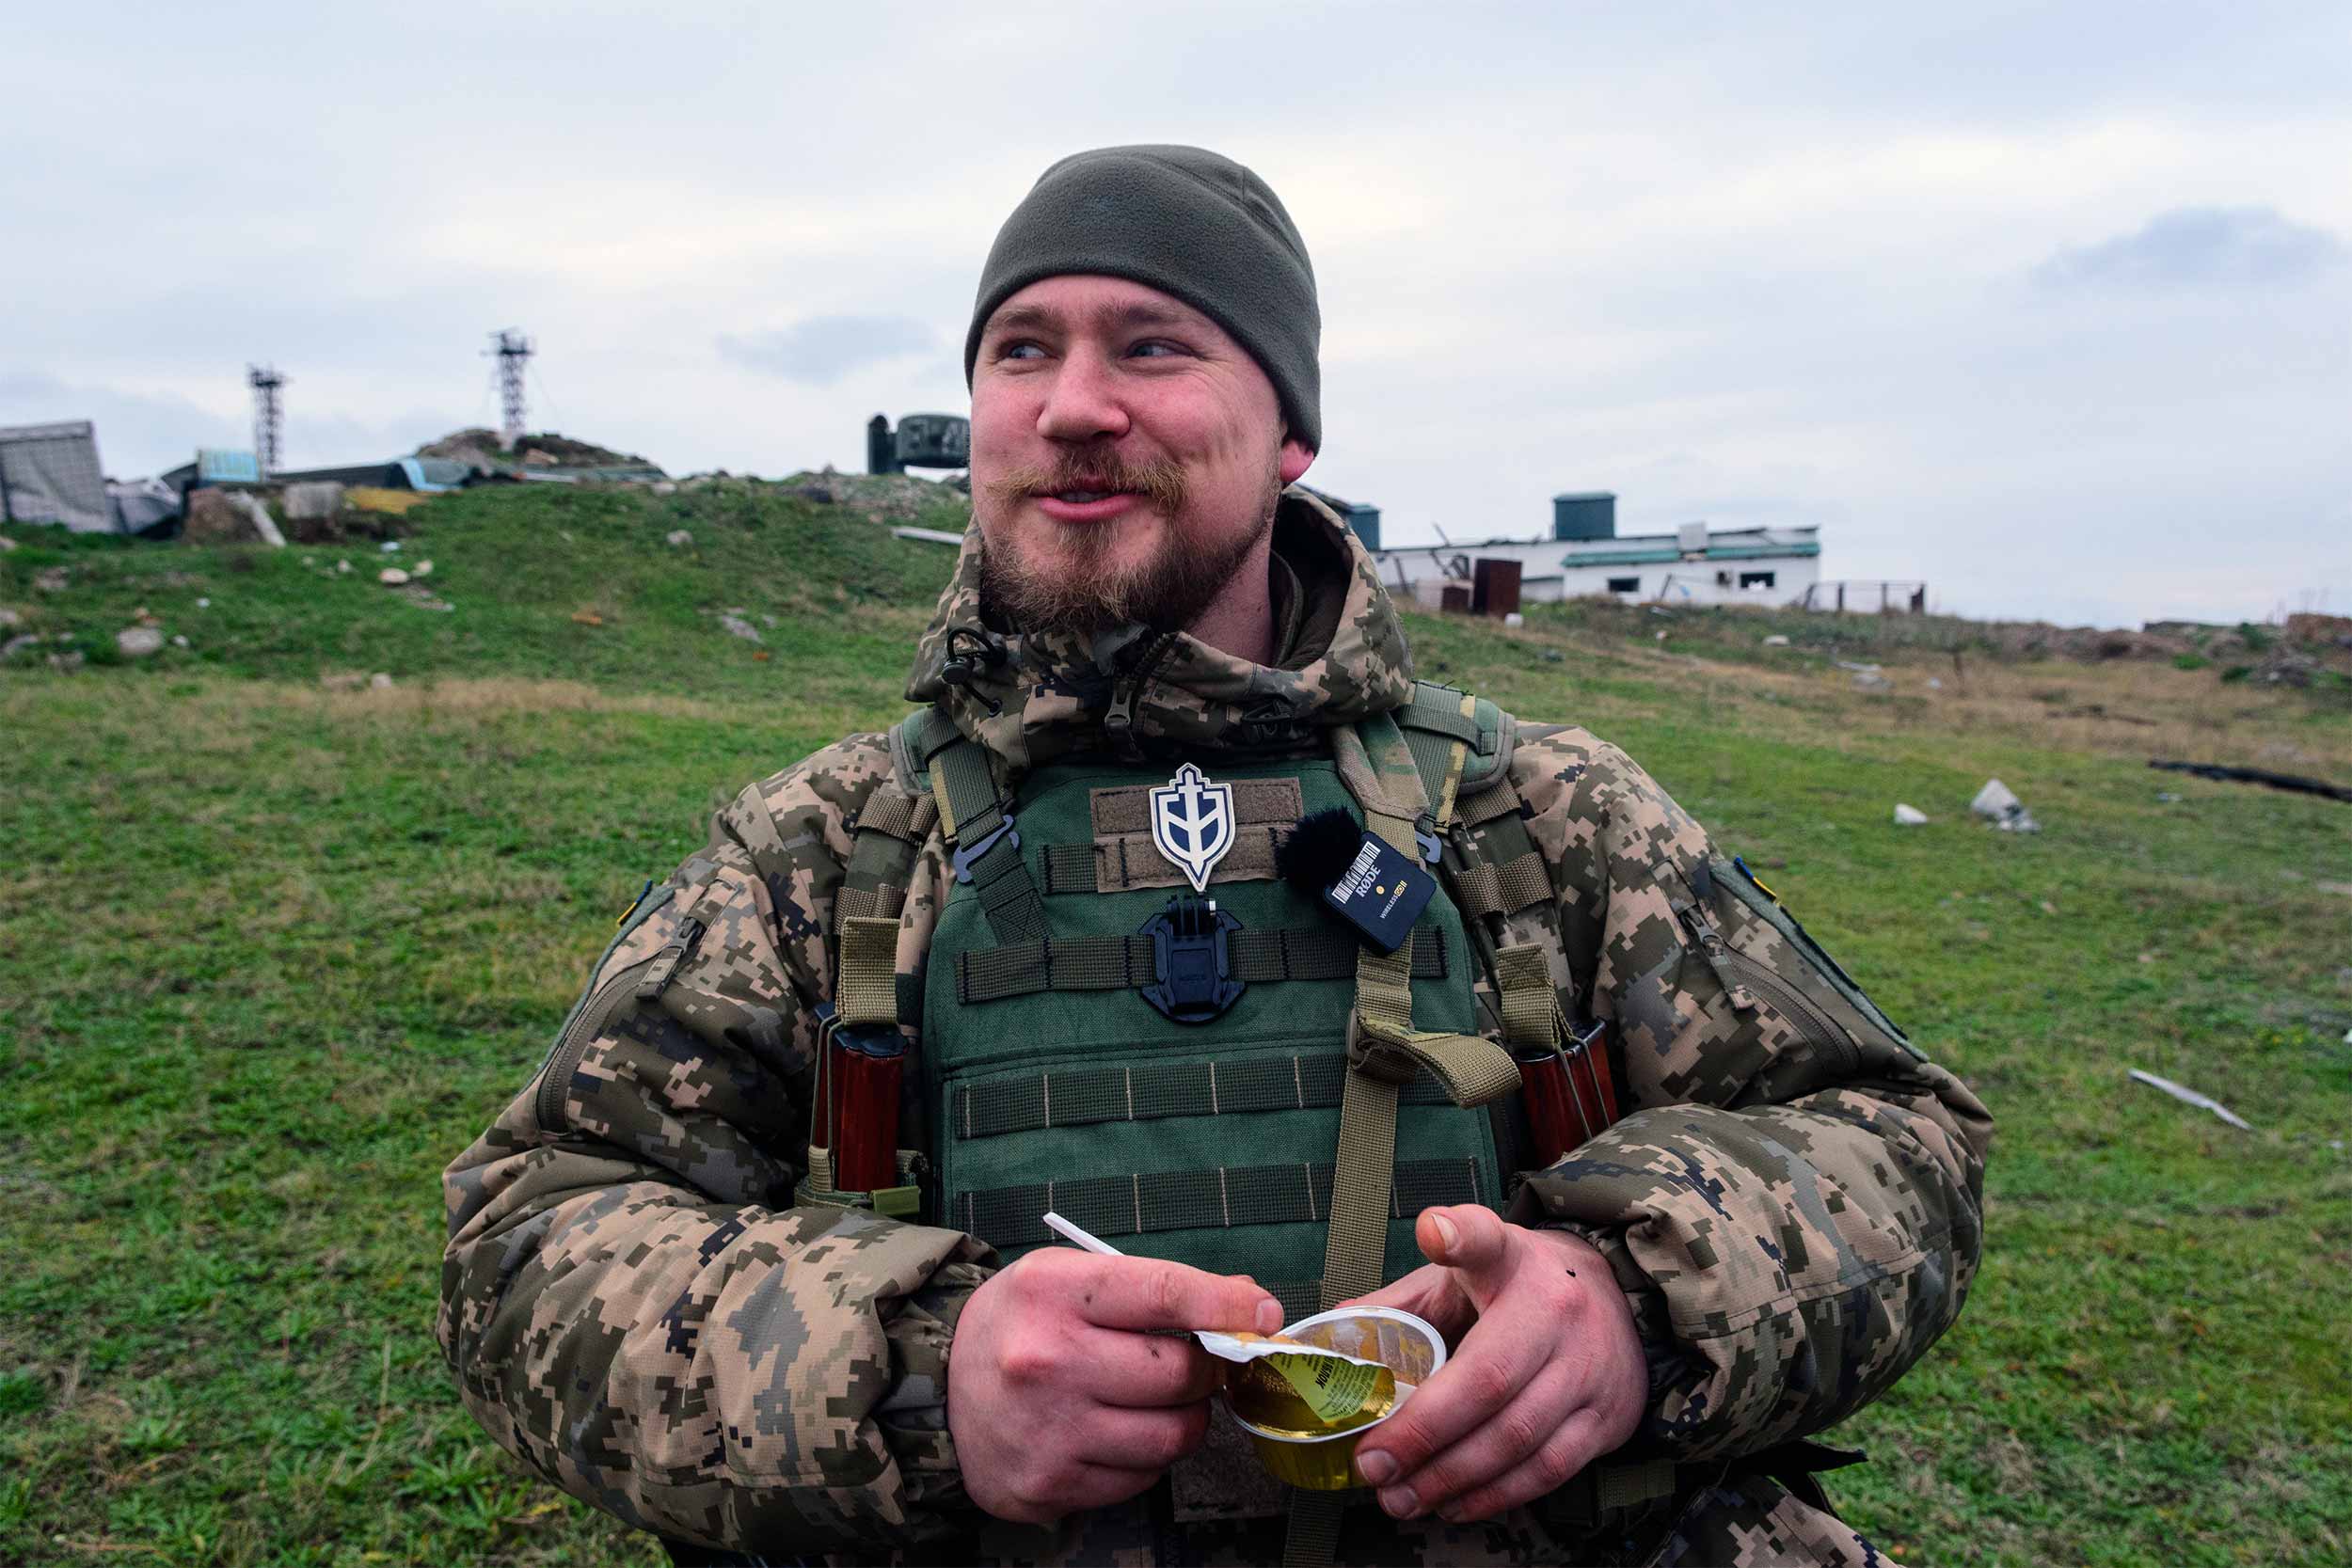 Ilya Bohdanov fought alongside the Ukrainian army as a volunteer in Donbas 2014. In 2022, he joined the Russian Volunteer Corps, a group composed of Russians who, at the start of the invasion, lived in Ukraine, Russia or Europe, and decided to fight alongside Ukraine's Armed Forces. © Michael Shtekel/IWPR